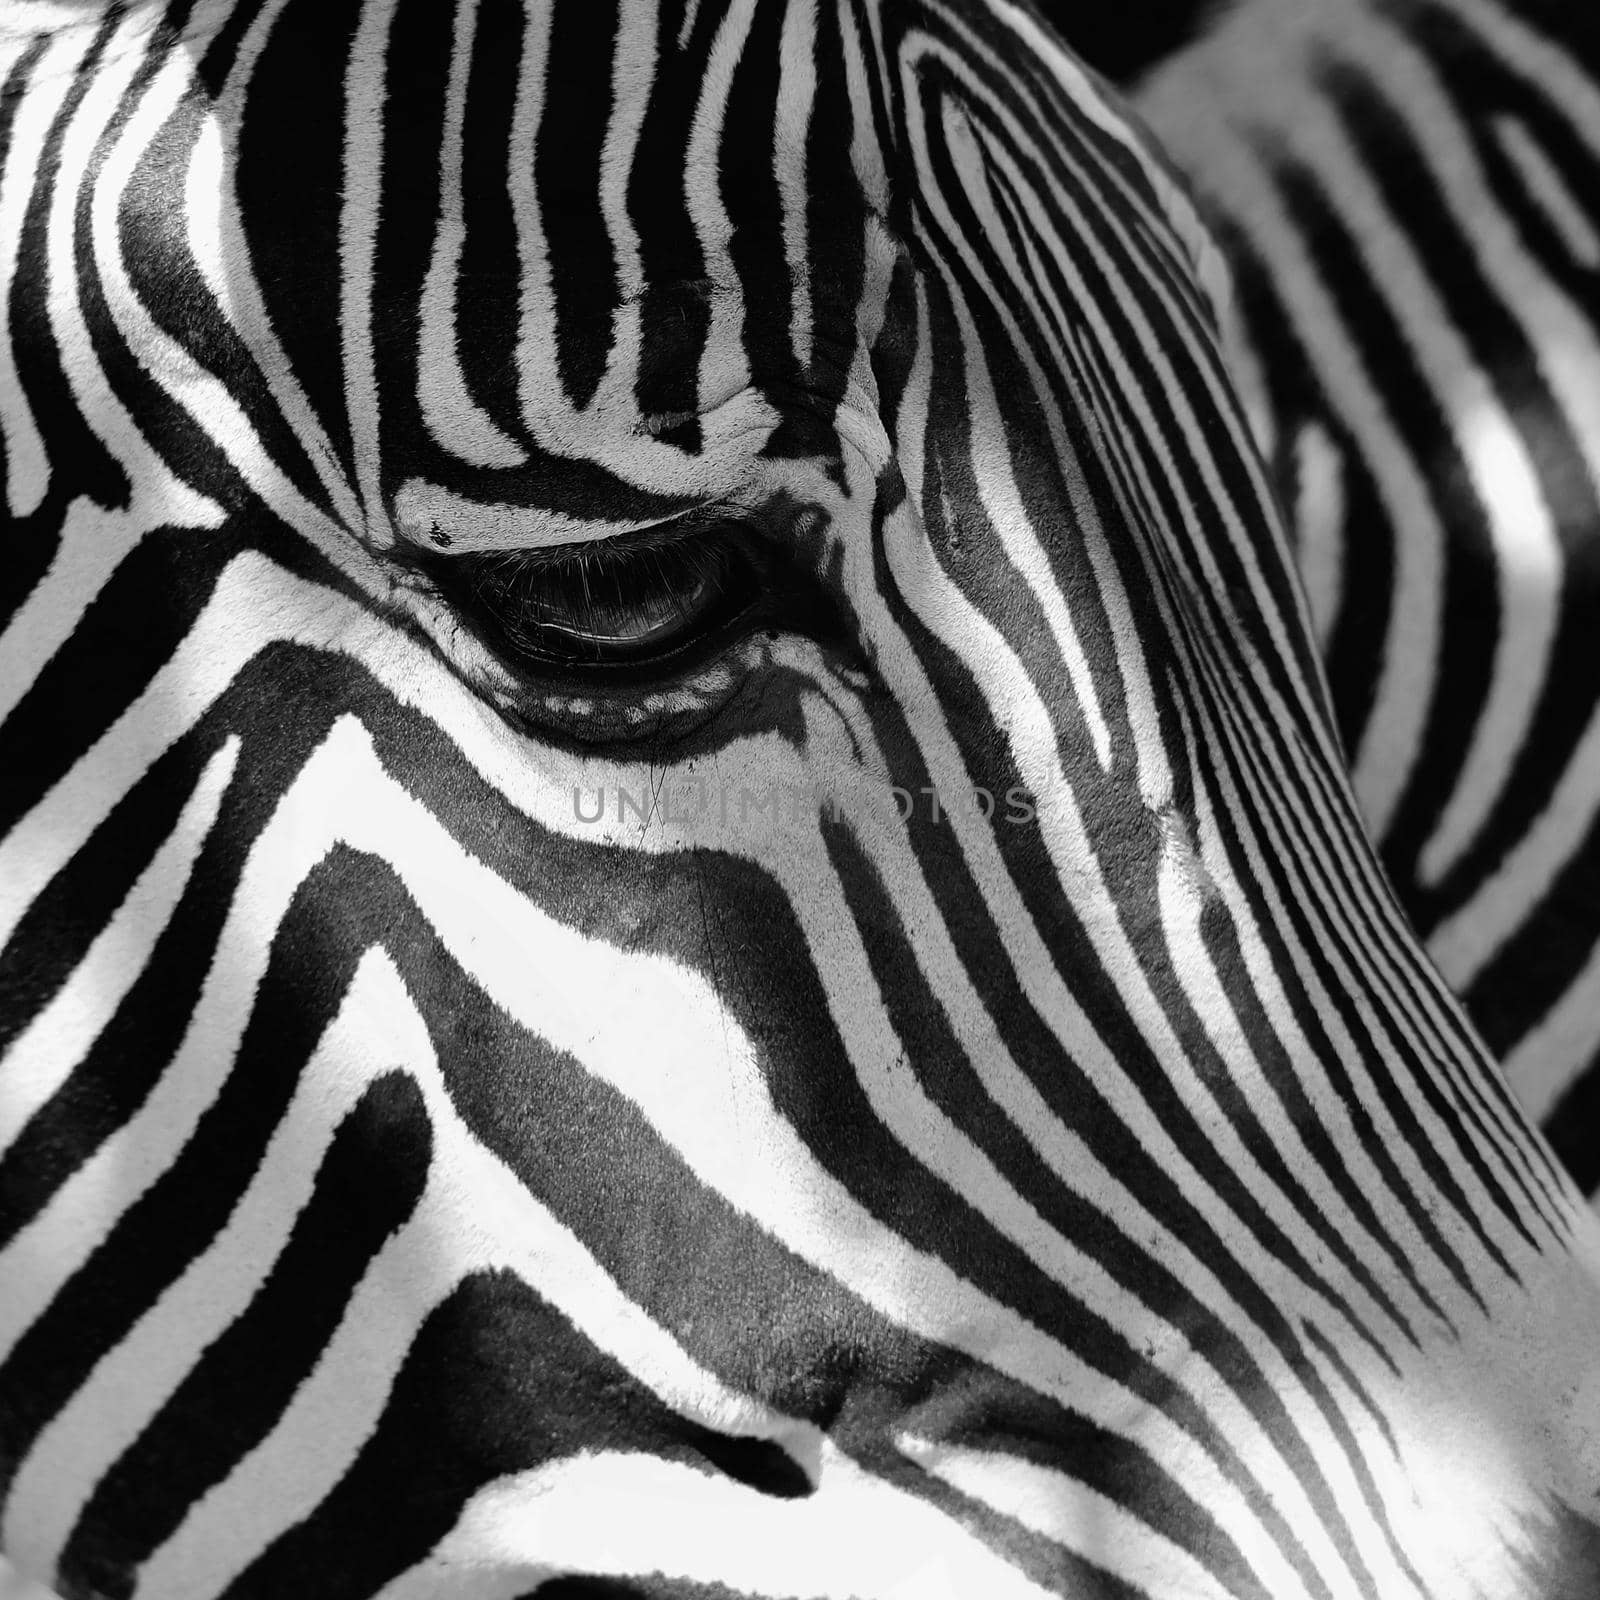 A beautiful shot of an animal in nature. Eye of zebra. by Montypeter